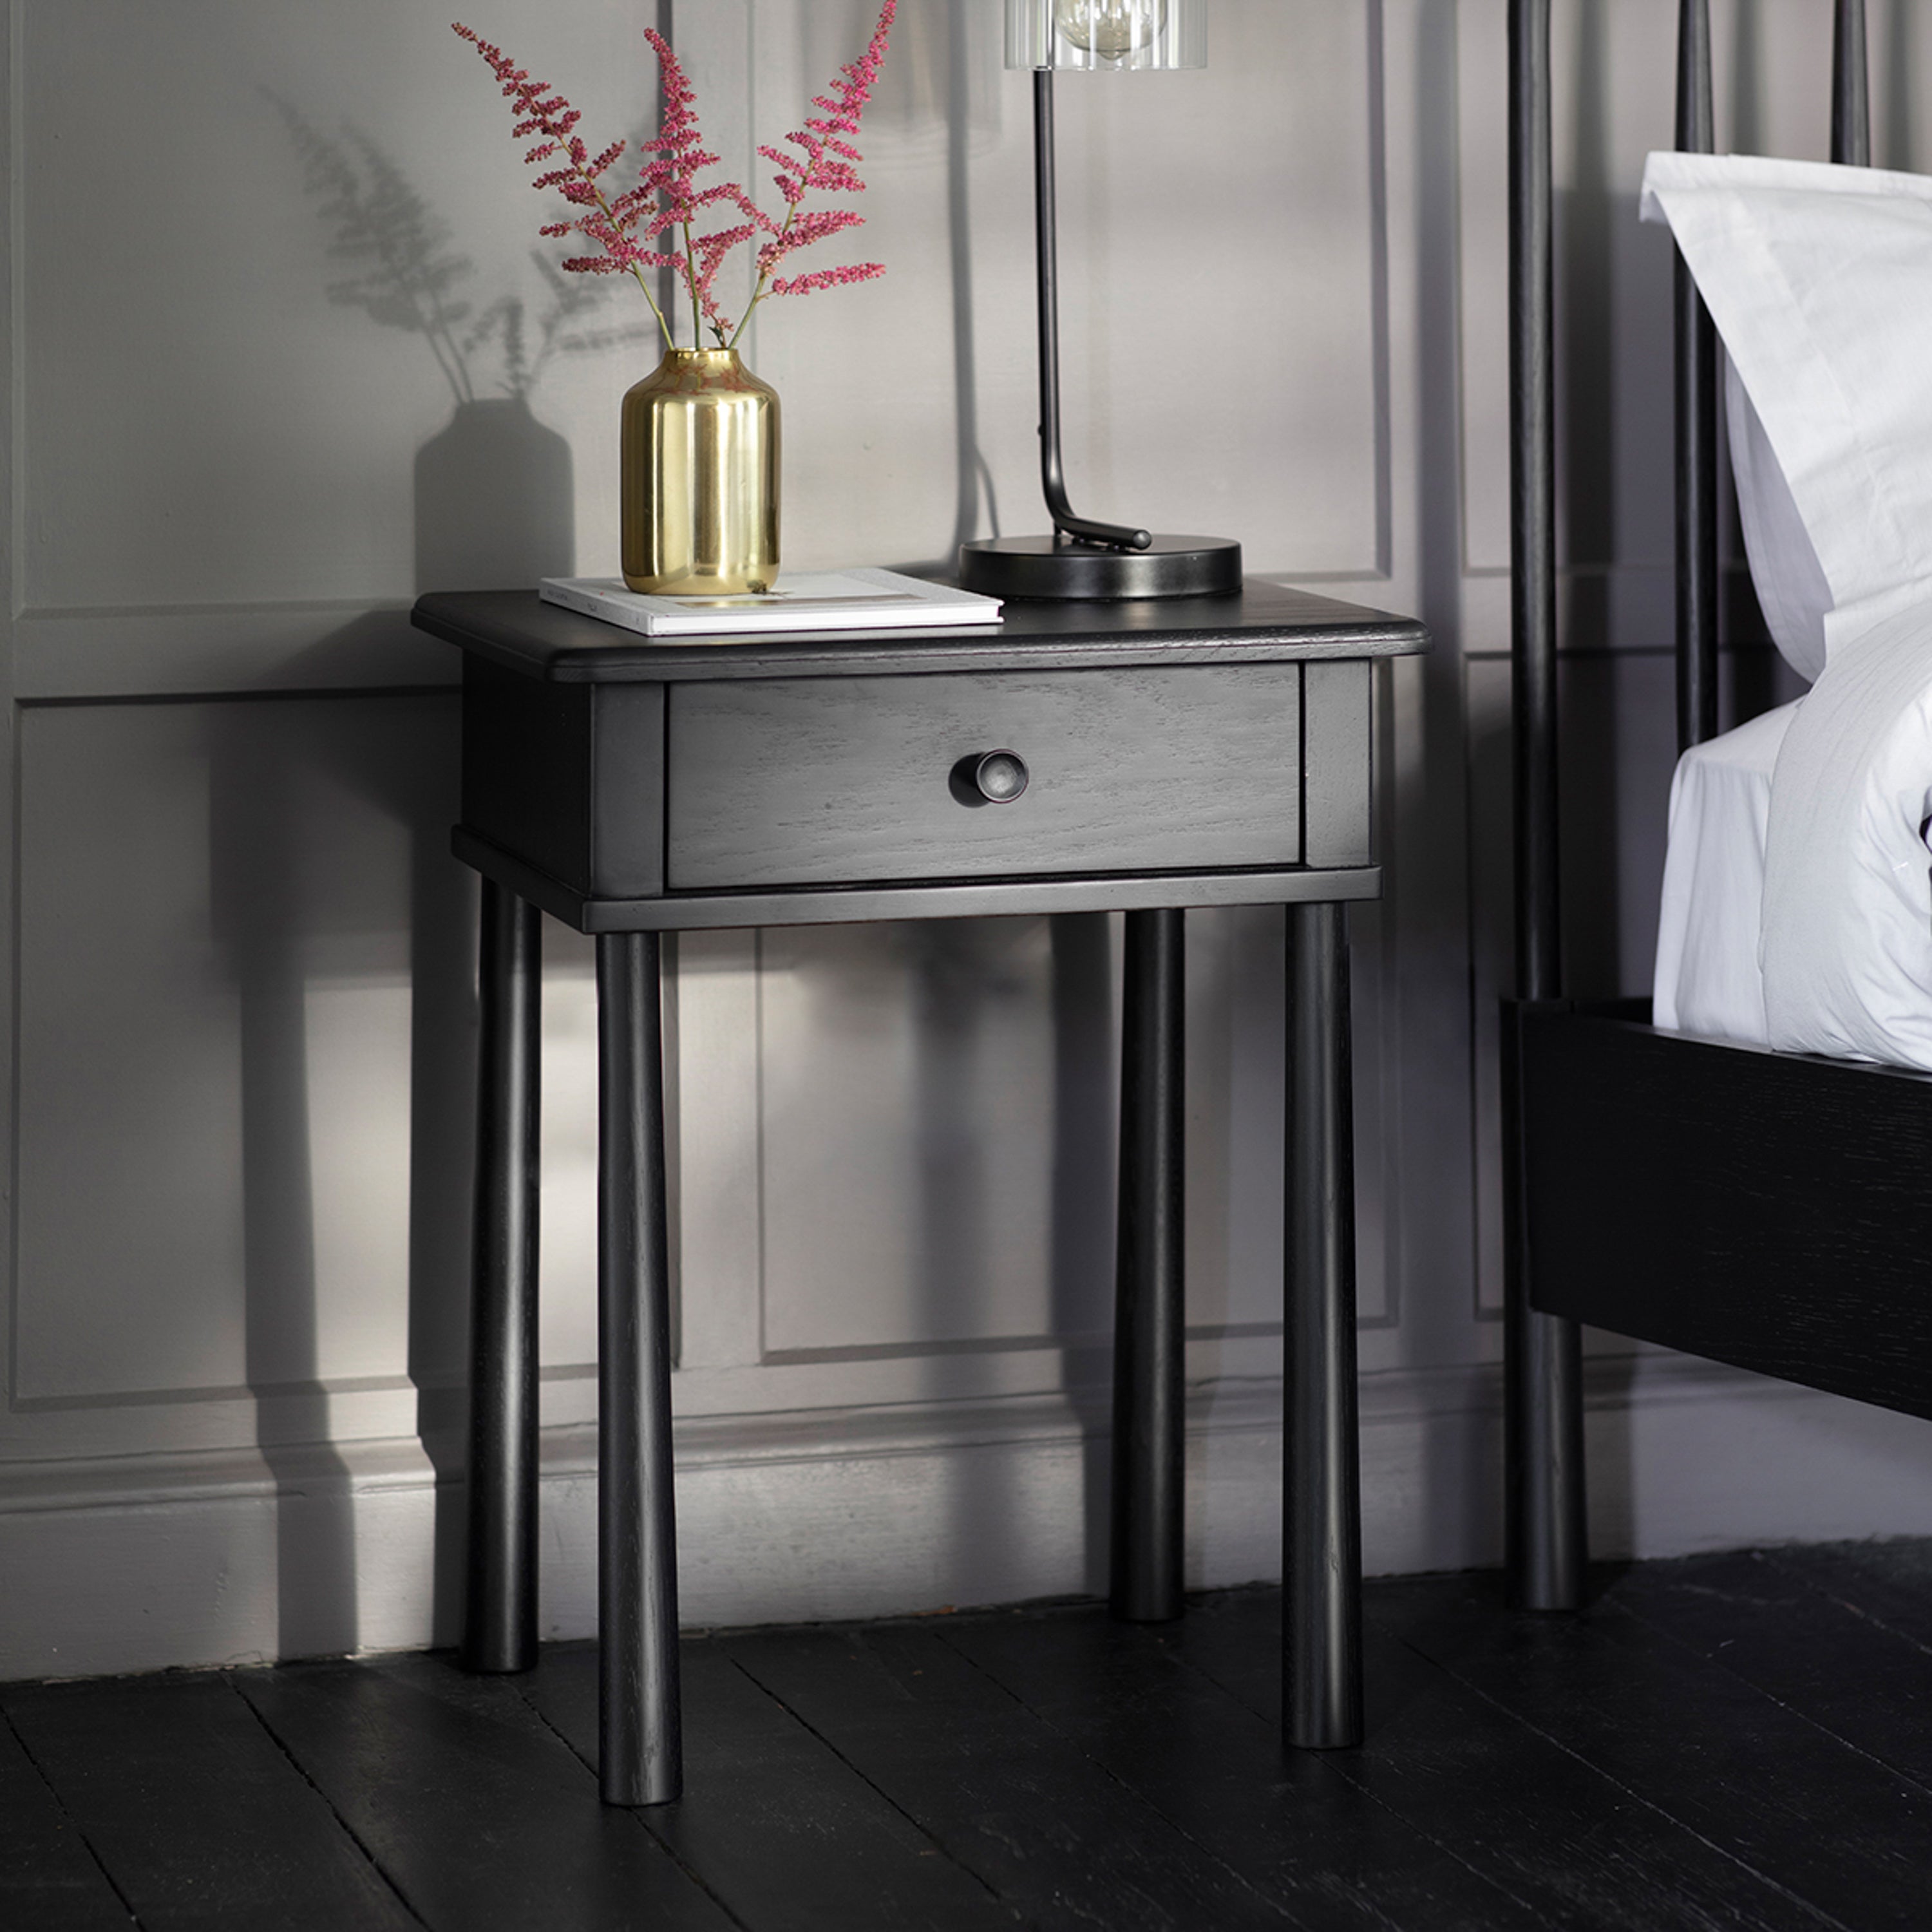 Photos - Coffee Table Waverly 1 Drawer Bedside Table Black 